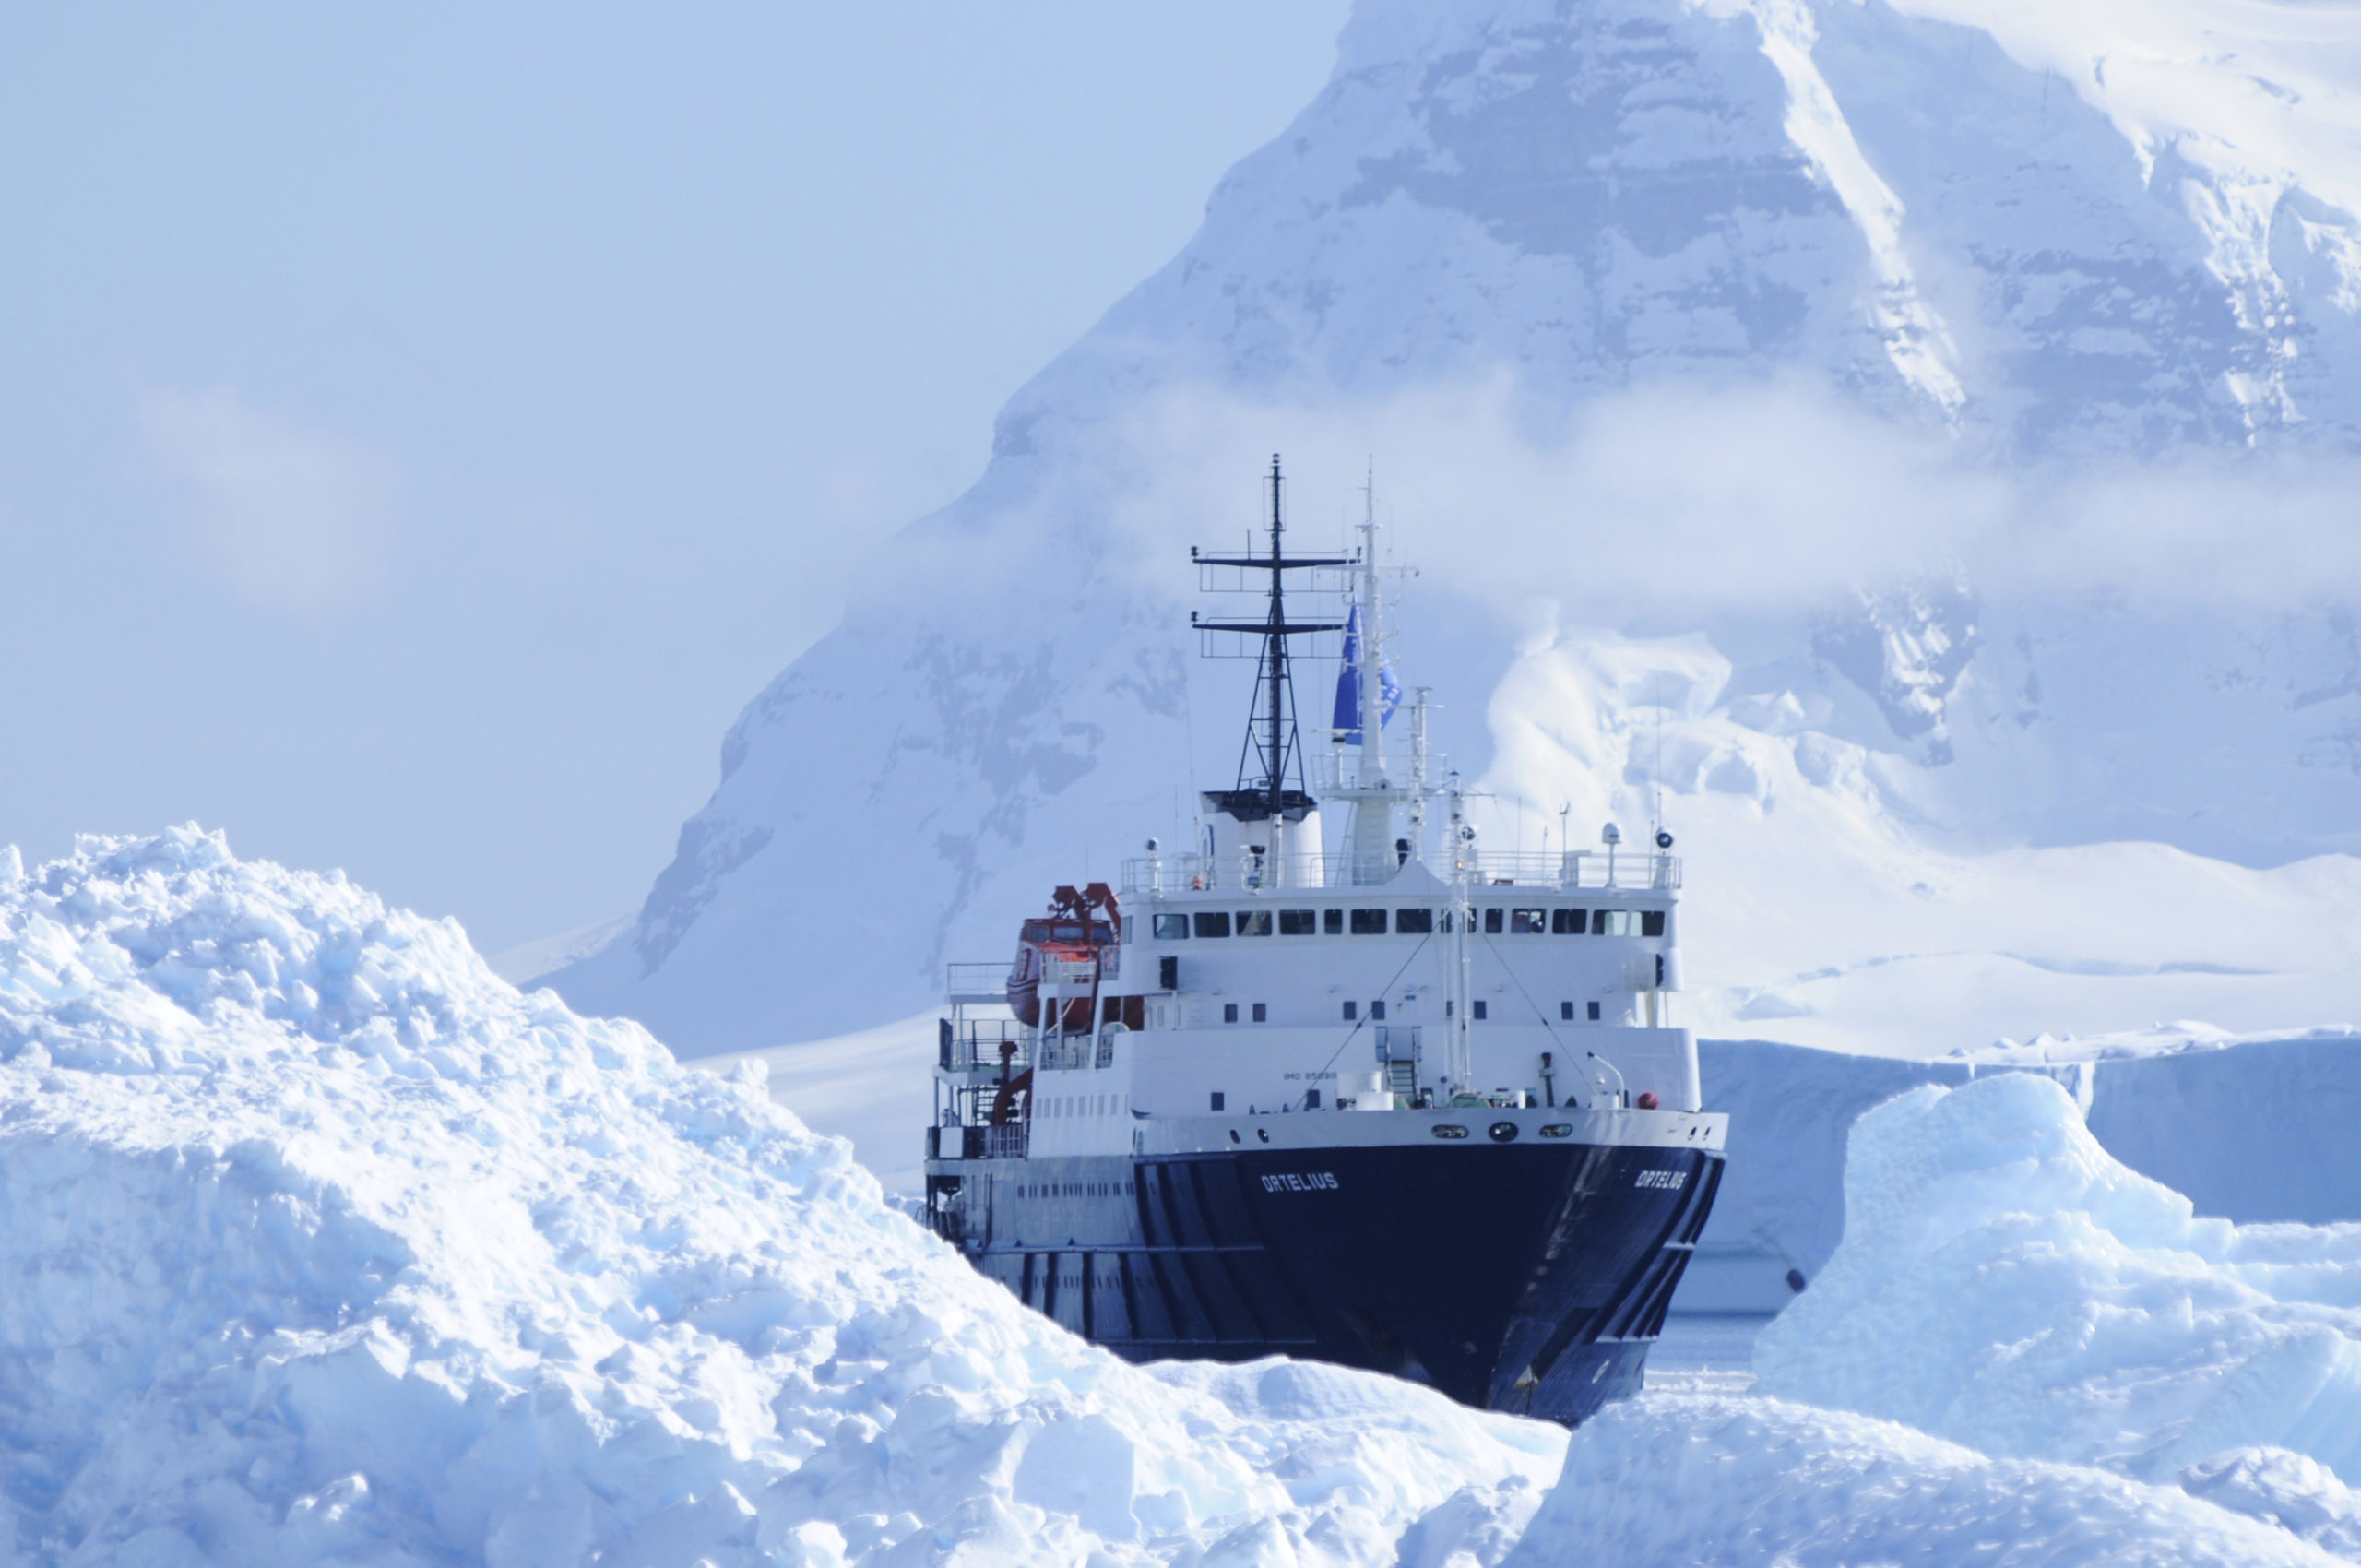 ortelius-at-cuverville-antarctica-january_elke-lindner-oceanwide-expeditions